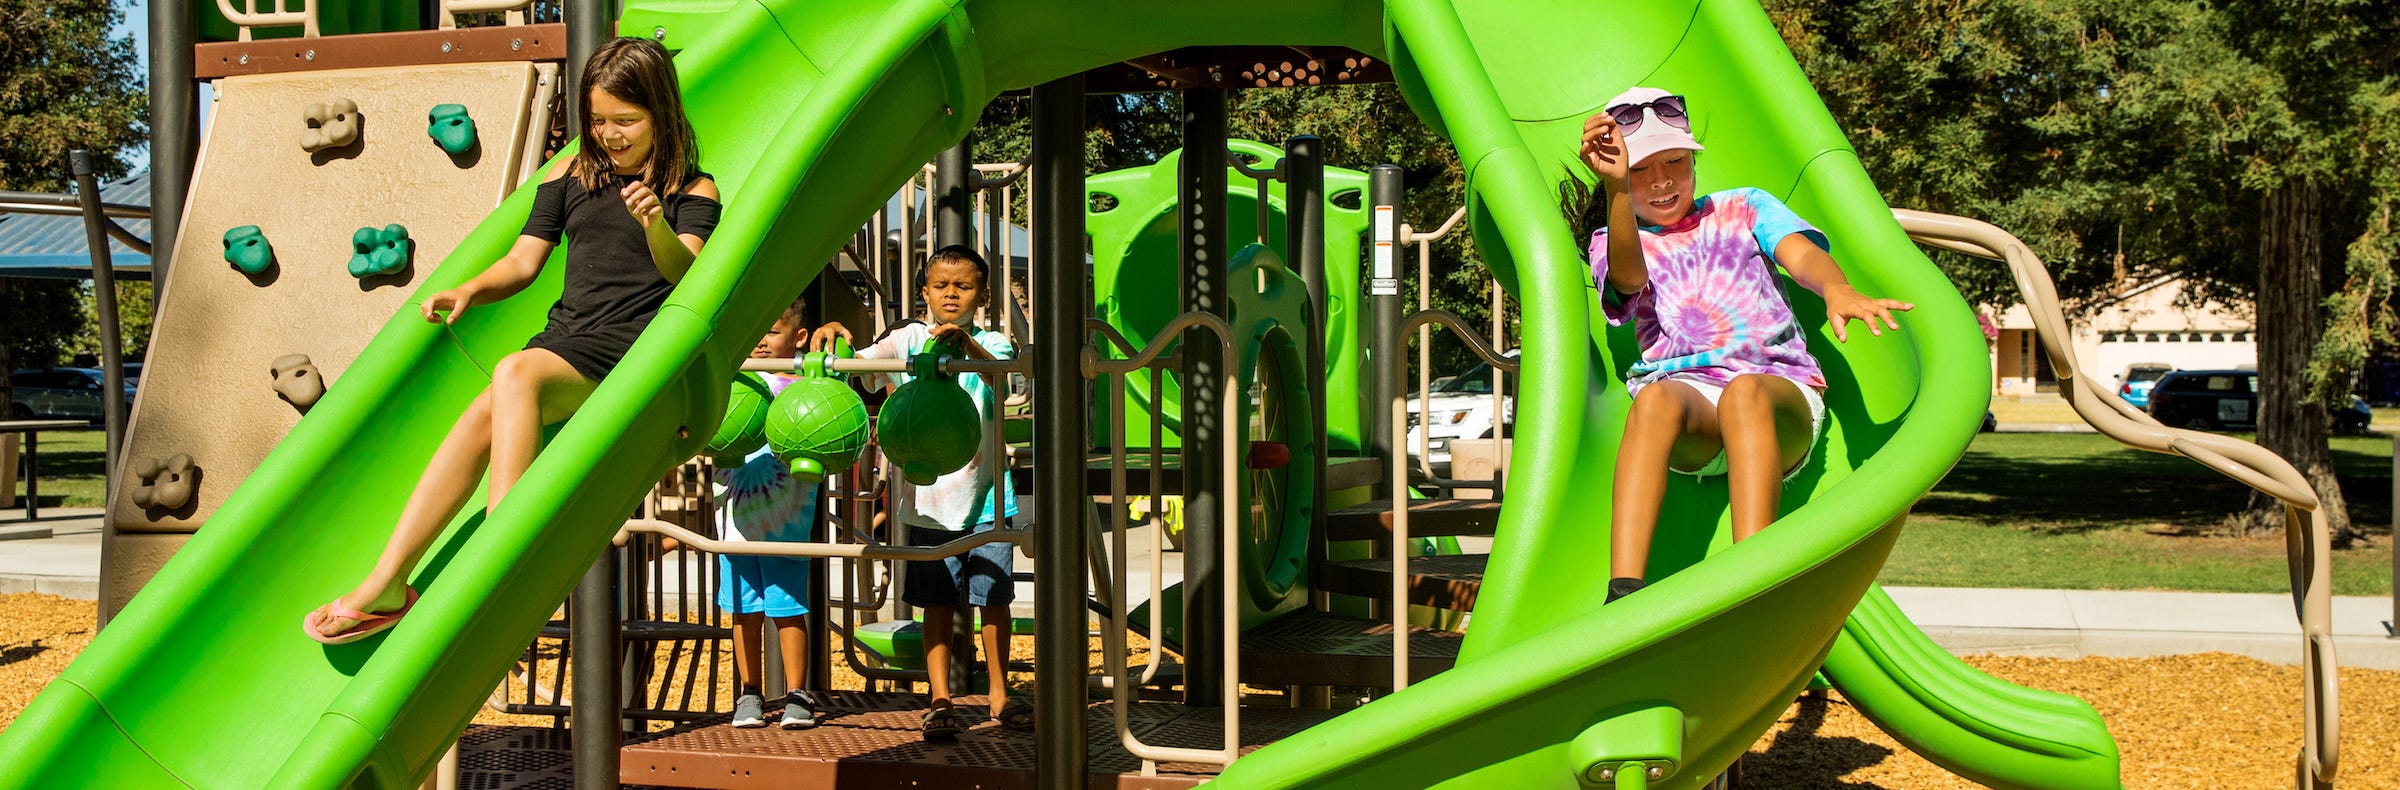 GameTime Funds 11 New Playgrounds in Kansas